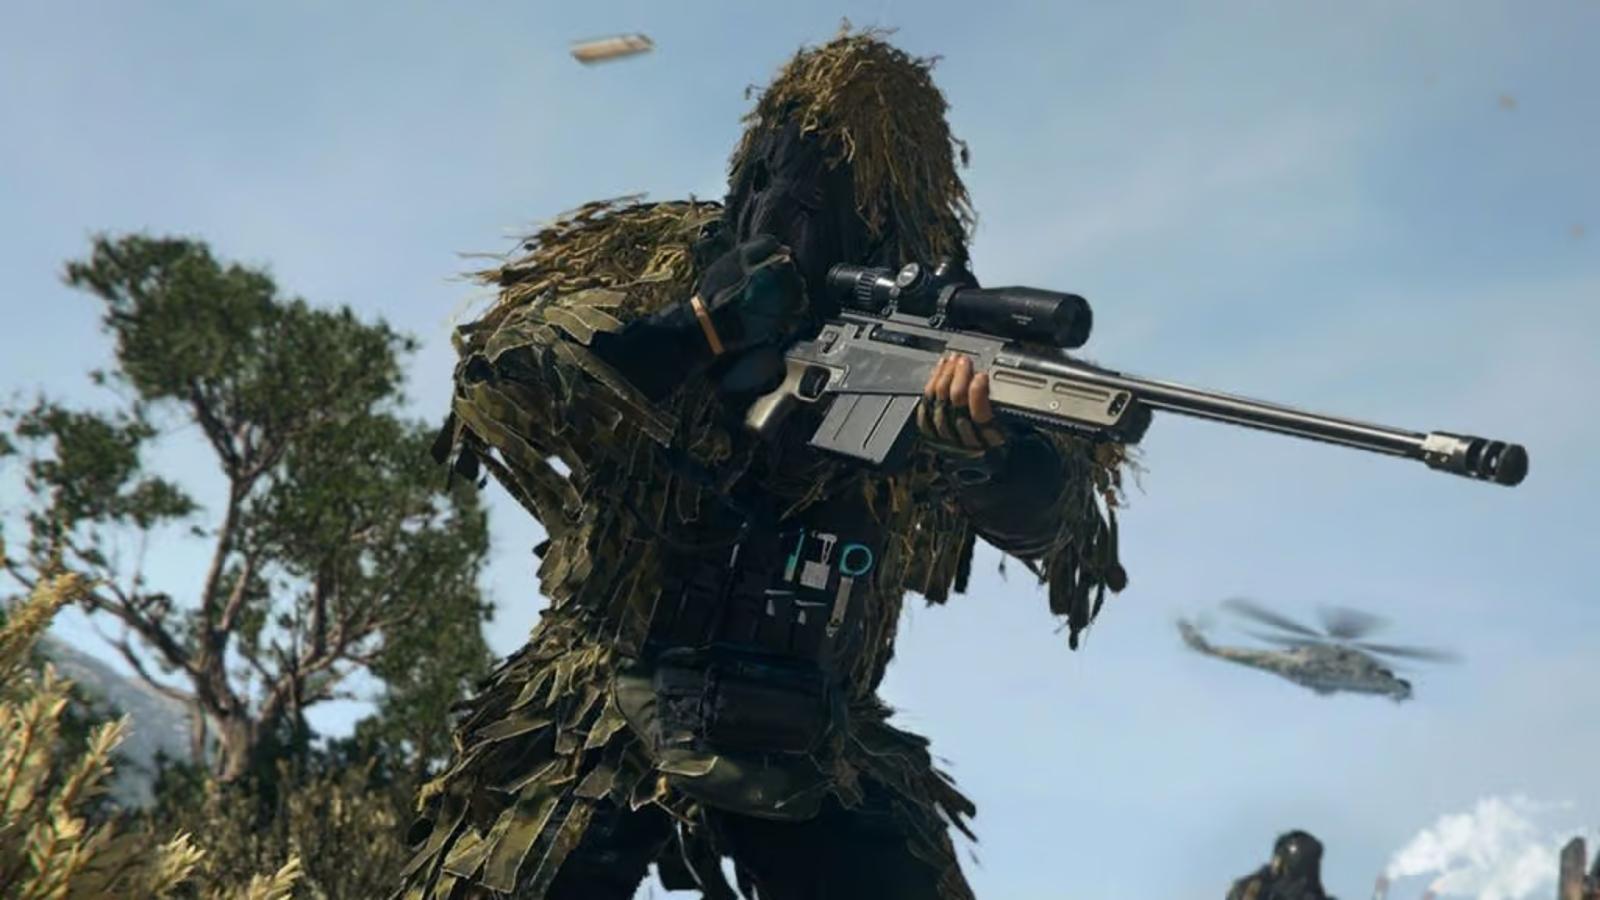 warzone 2 operator in ghillie suit holding signal 50 sniper rifle